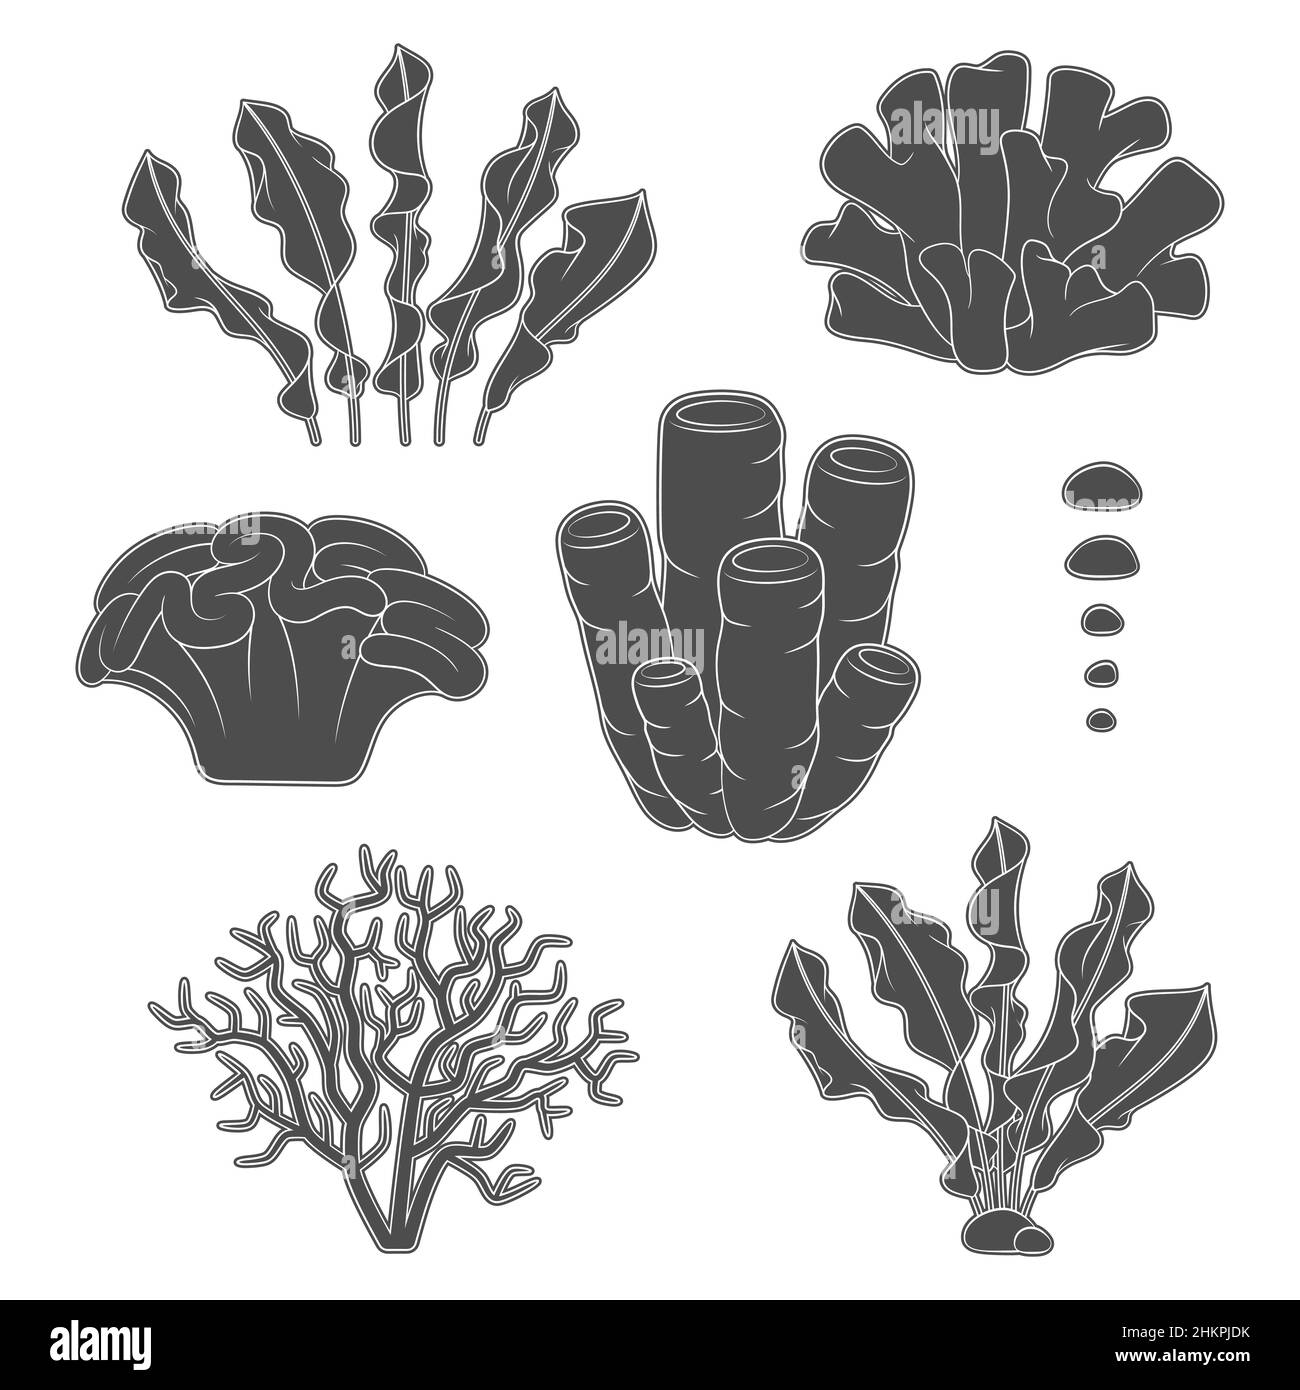 Set of black and white illustrations with corals and algae. Isolated vector objects on a white background. Stock Vector